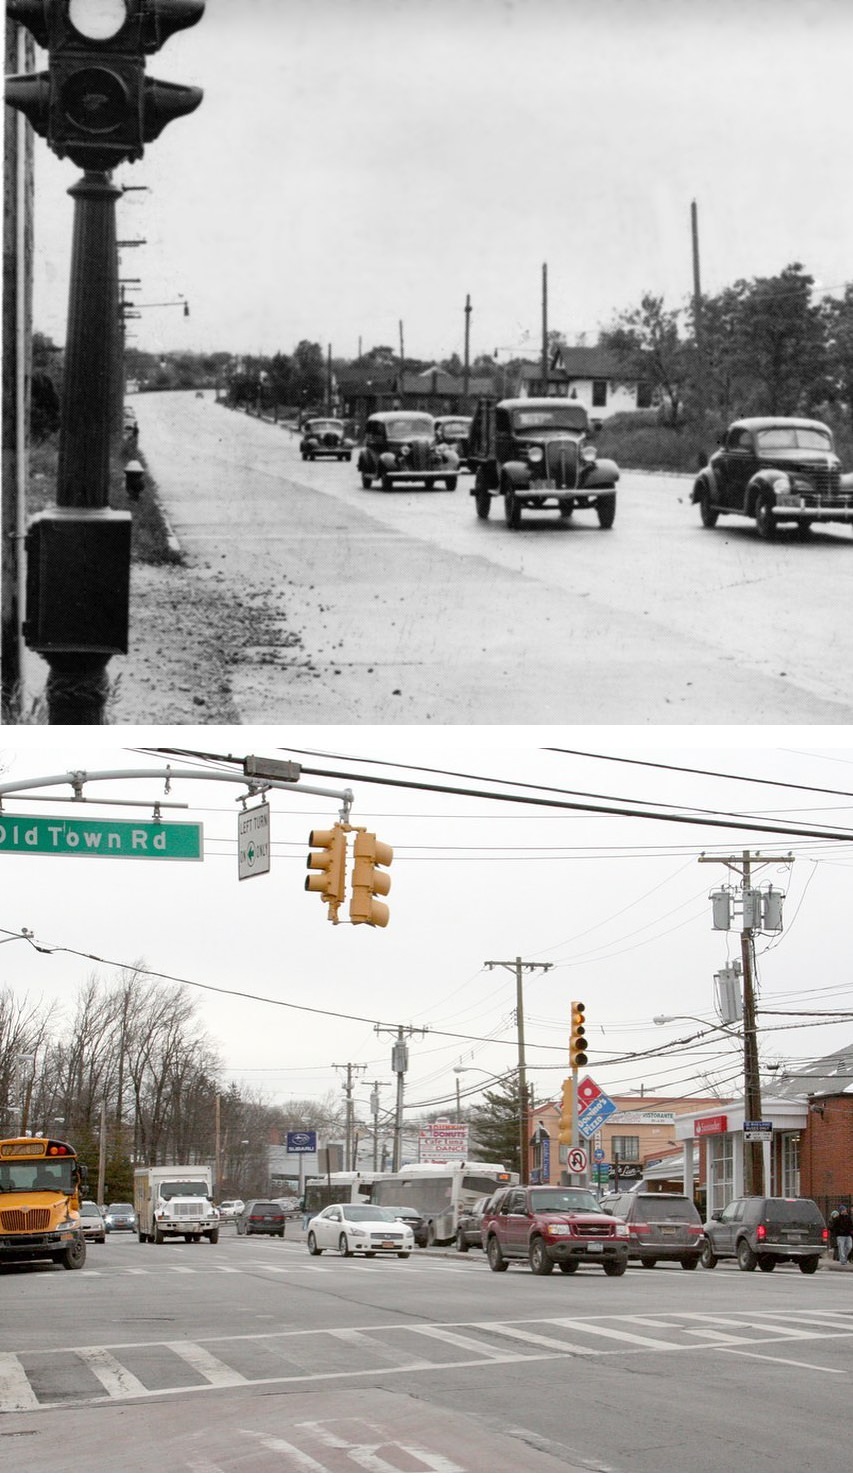 Hylan Blvd: View From Old Town Rd In Both 1939 And 2014.